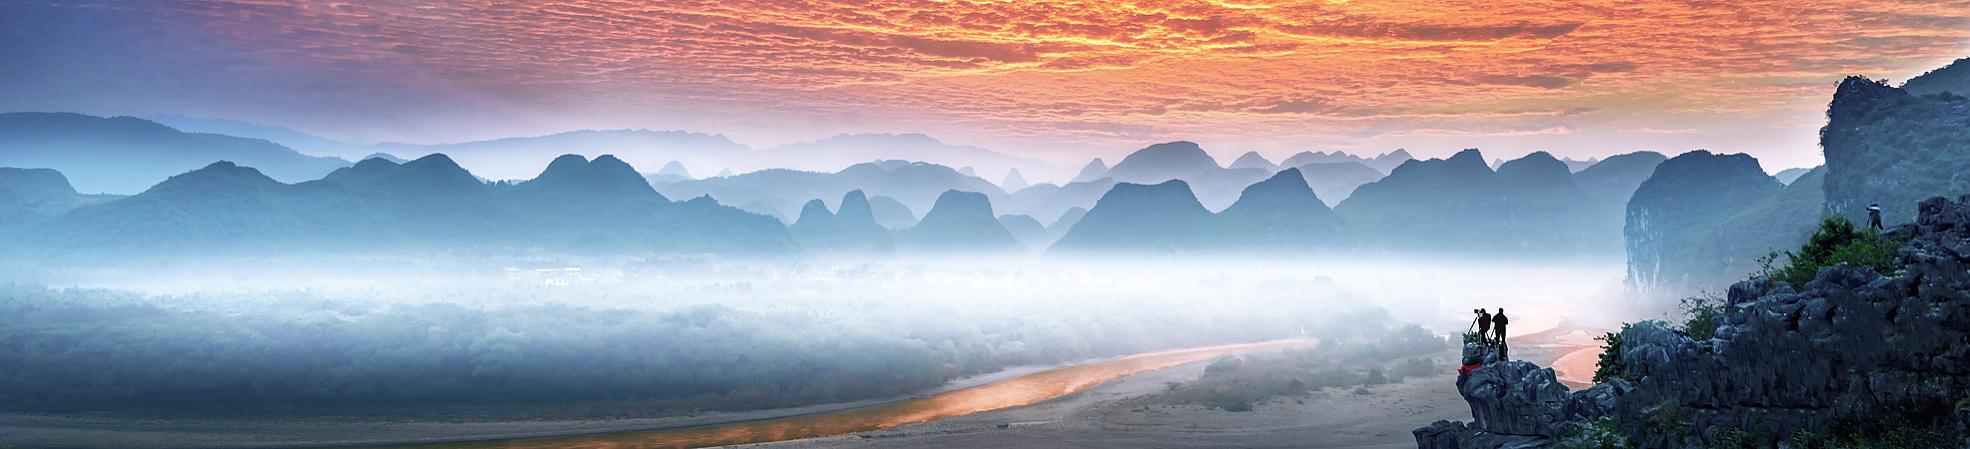 China for Couples: Top 10 Romantic Attractions to Visit